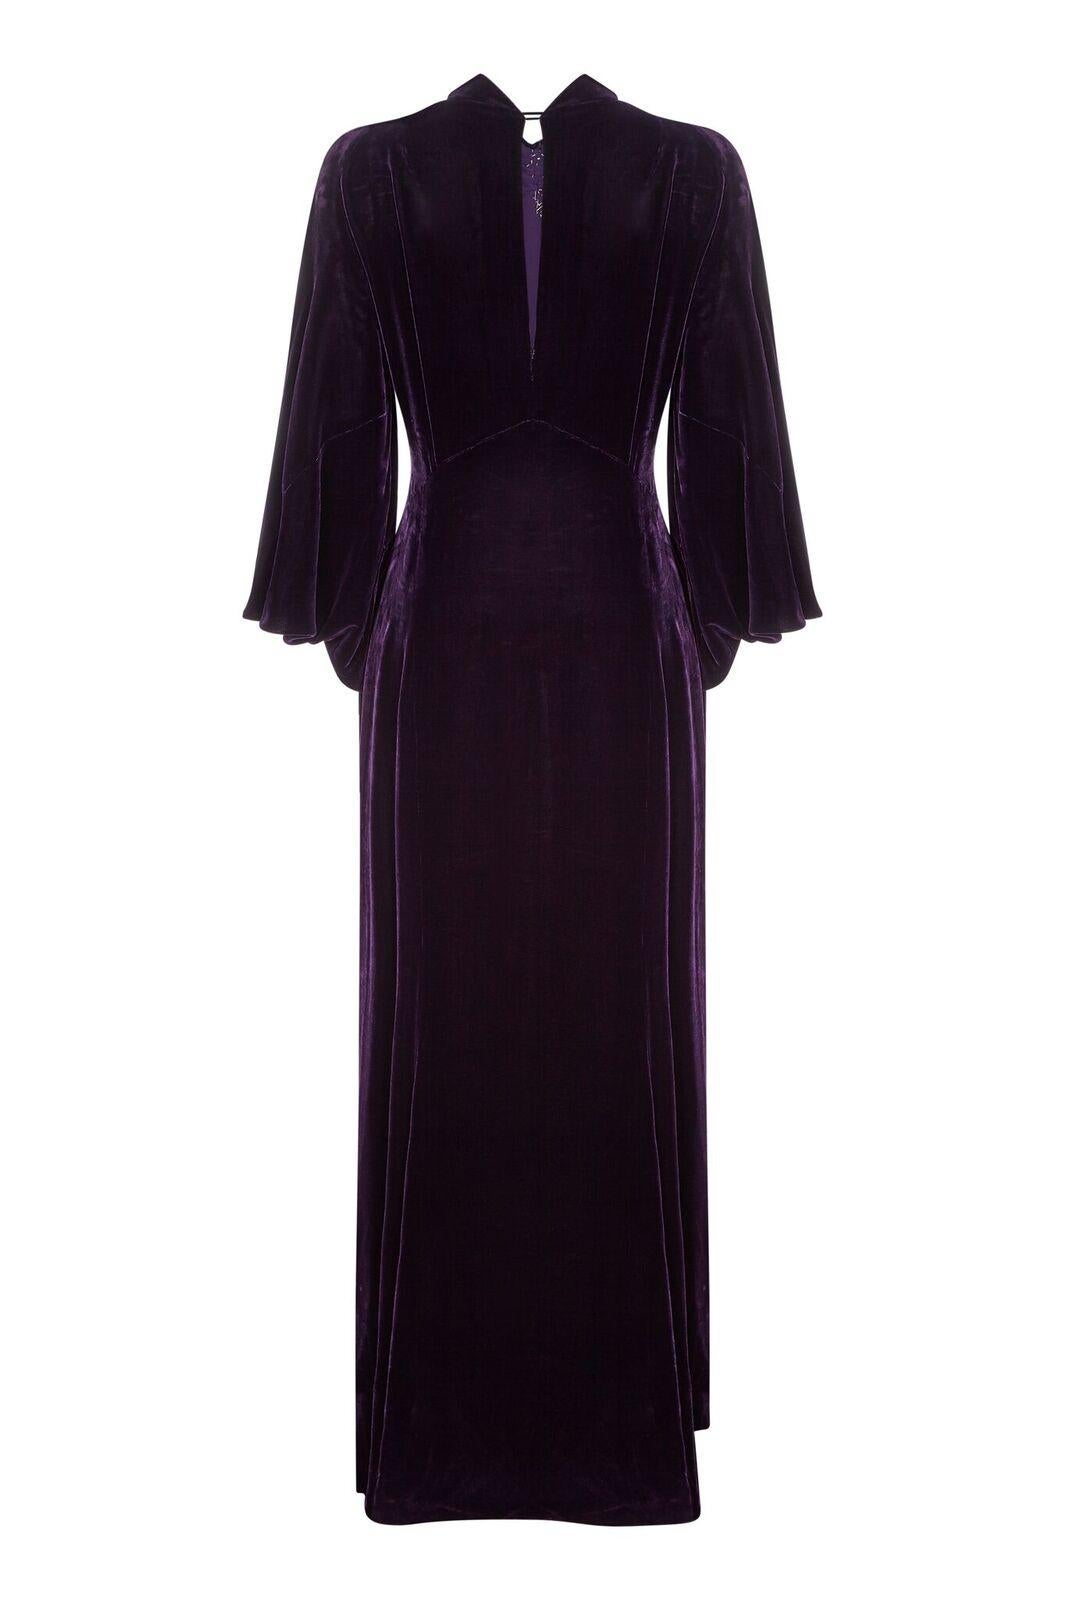 This incredible 1930s gown in deep purple velvet with diamanté embellishment is tailored skilfully at the waist to fit beautifully over the curve of the hip, falling into a dramatic floor sweeping skirt with a slight train at the reverse. The long